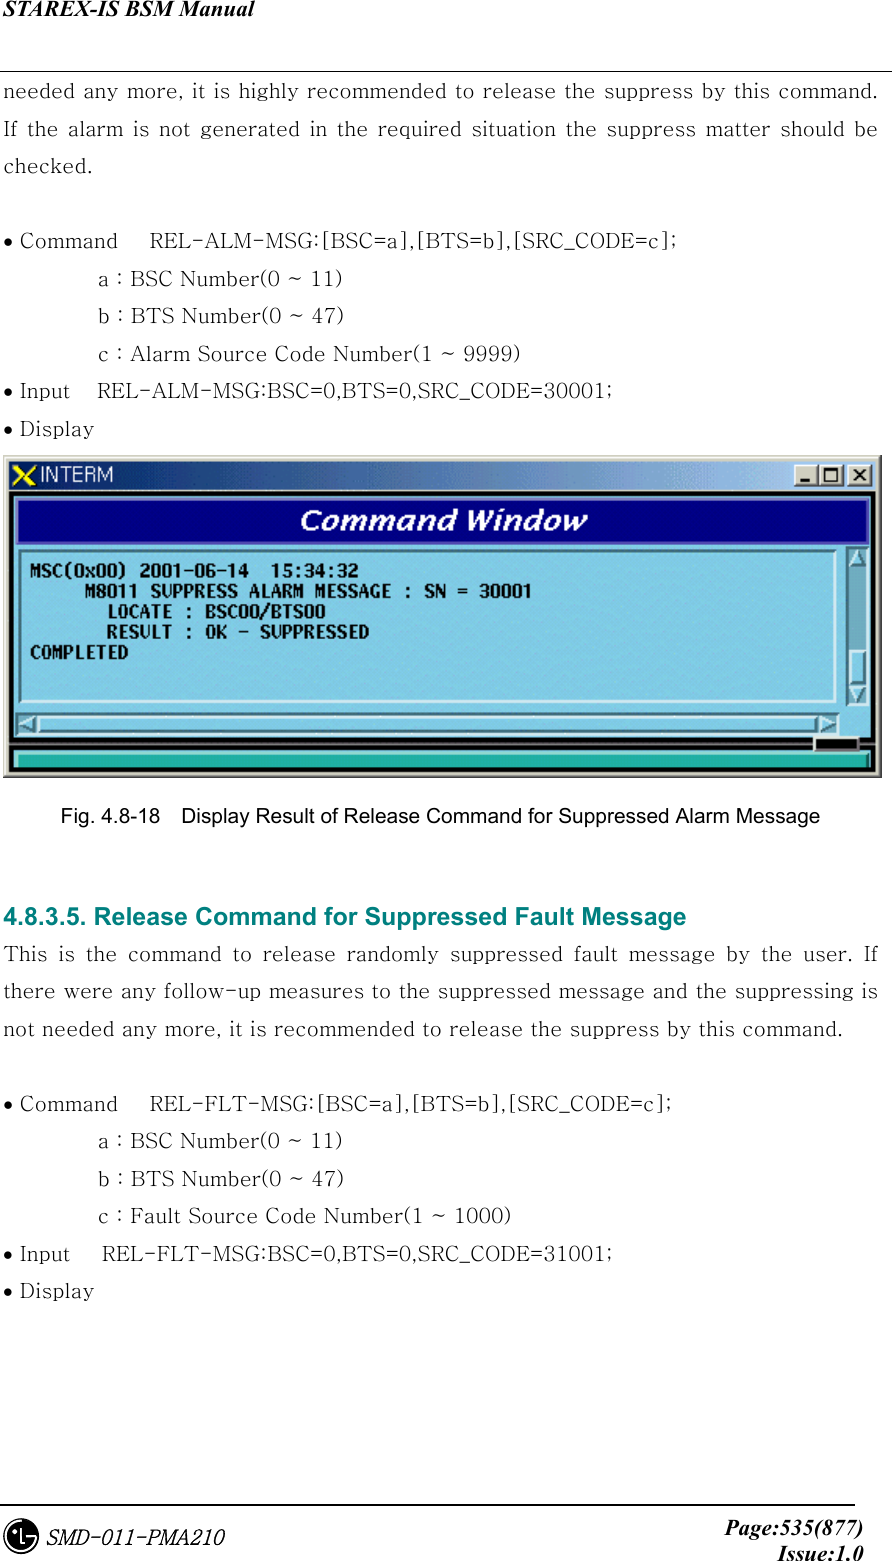 STAREX-IS BSM Manual     Page:535(877)Issue:1.0SMD-011-PMA210 needed any more, it is highly recommended to release the suppress by this command. If  the  alarm  is  not  generated  in the  required situation  the  suppress matter  should be checked.    • Command      REL-ALM-MSG:[BSC=a],[BTS=b],[SRC_CODE=c];            a : BSC Number(0 ~ 11)          b : BTS Number(0 ~ 47)          c : Alarm Source Code Number(1 ~ 9999) • Input    REL-ALM-MSG:BSC=0,BTS=0,SRC_CODE=30001; • Display    Fig. 4.8-18    Display Result of Release Command for Suppressed Alarm Message  4.8.3.5. Release Command for Suppressed Fault Message This  is  the  command  to  release  randomly  suppressed  fault  message by the user. If there were any follow-up measures to the suppressed message and the suppressing is not needed any more, it is recommended to release the suppress by this command.    • Command      REL-FLT-MSG:[BSC=a],[BTS=b],[SRC_CODE=c];            a : BSC Number(0 ~ 11)          b : BTS Number(0 ~ 47)          c : Fault Source Code Number(1 ~ 1000) • Input      REL-FLT-MSG:BSC=0,BTS=0,SRC_CODE=31001; • Display   